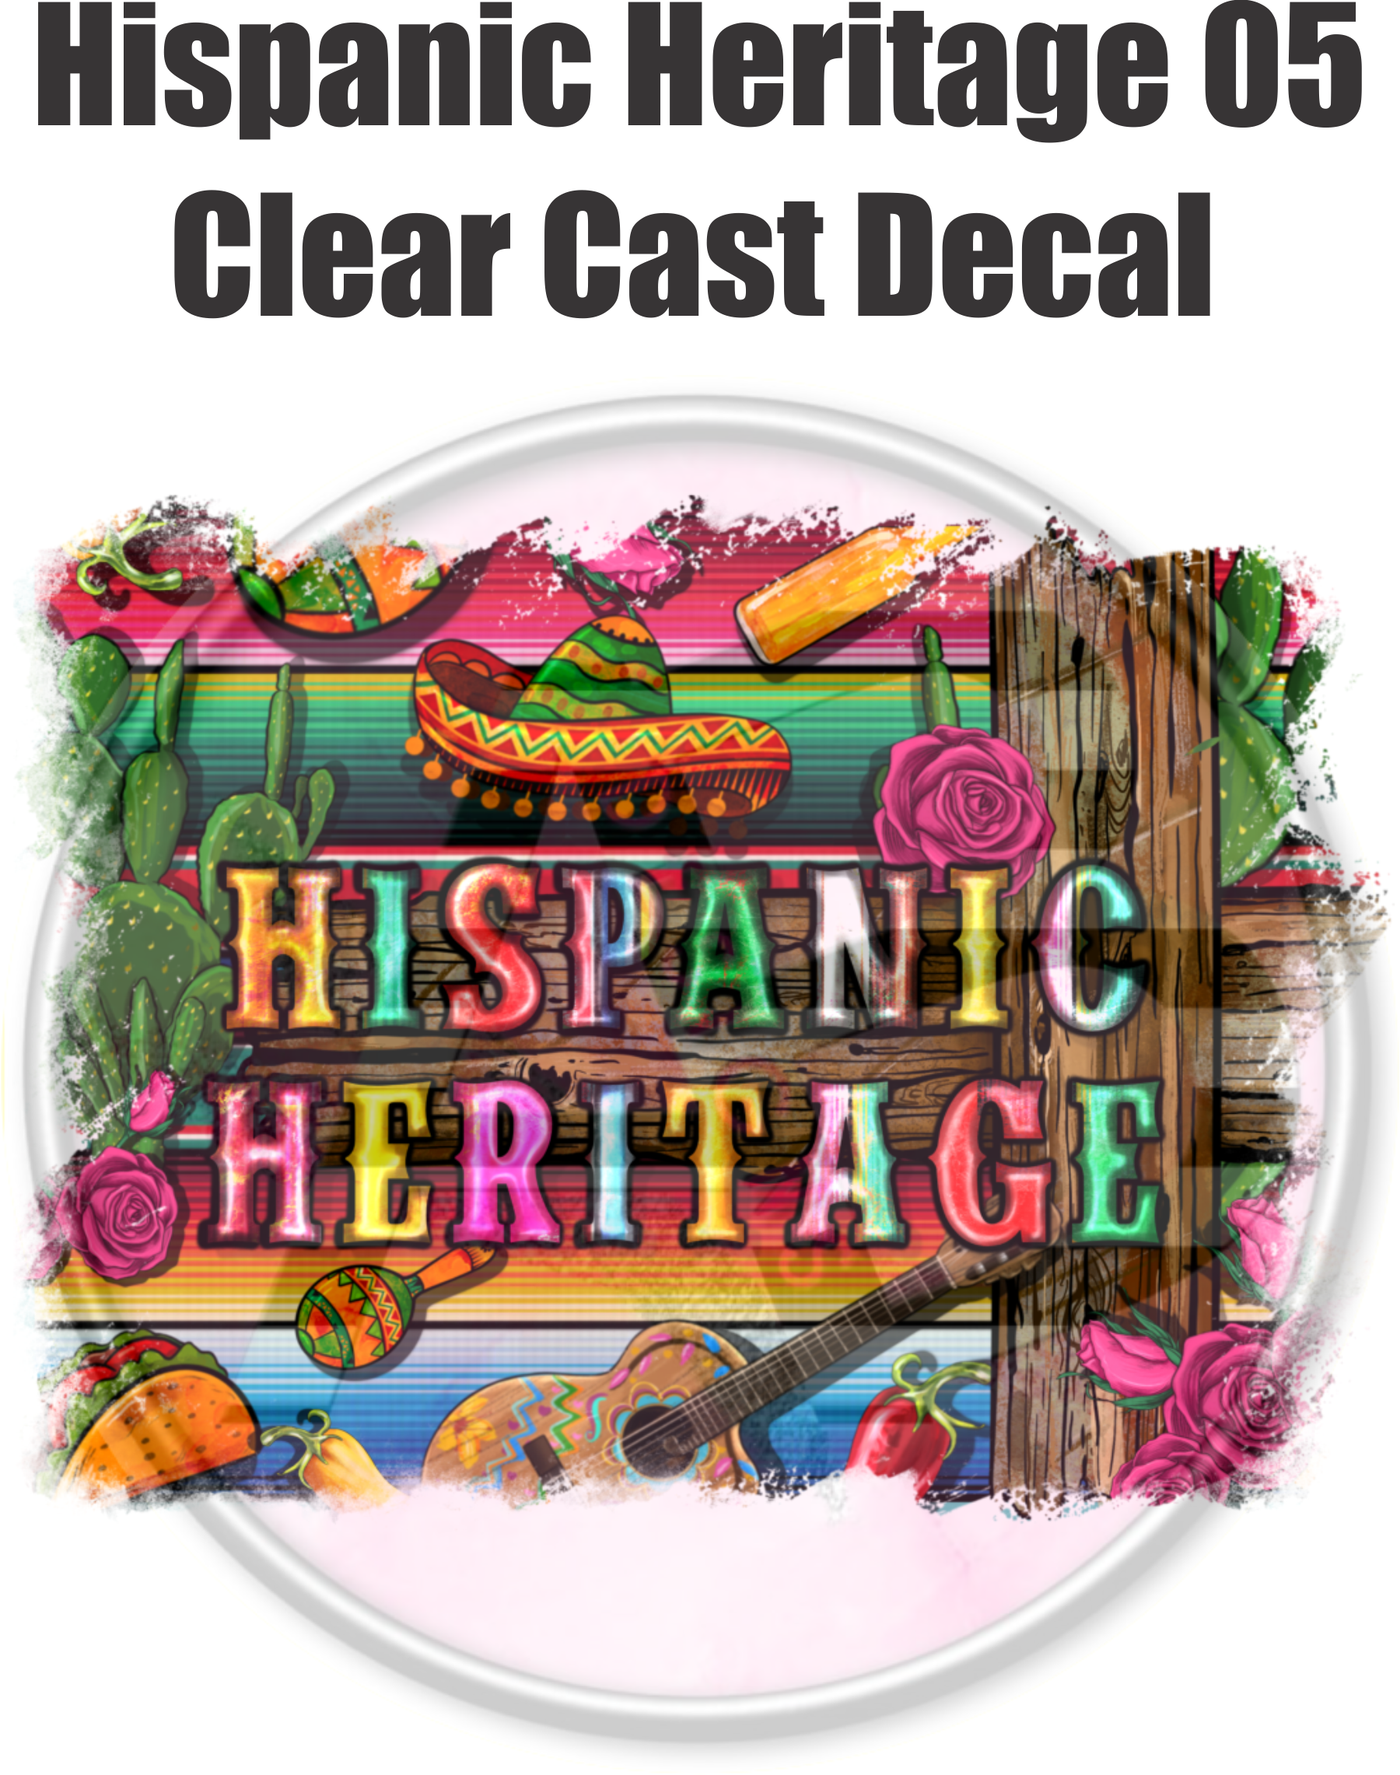 Hispanic Heritage 05 - Clear Cast Decal